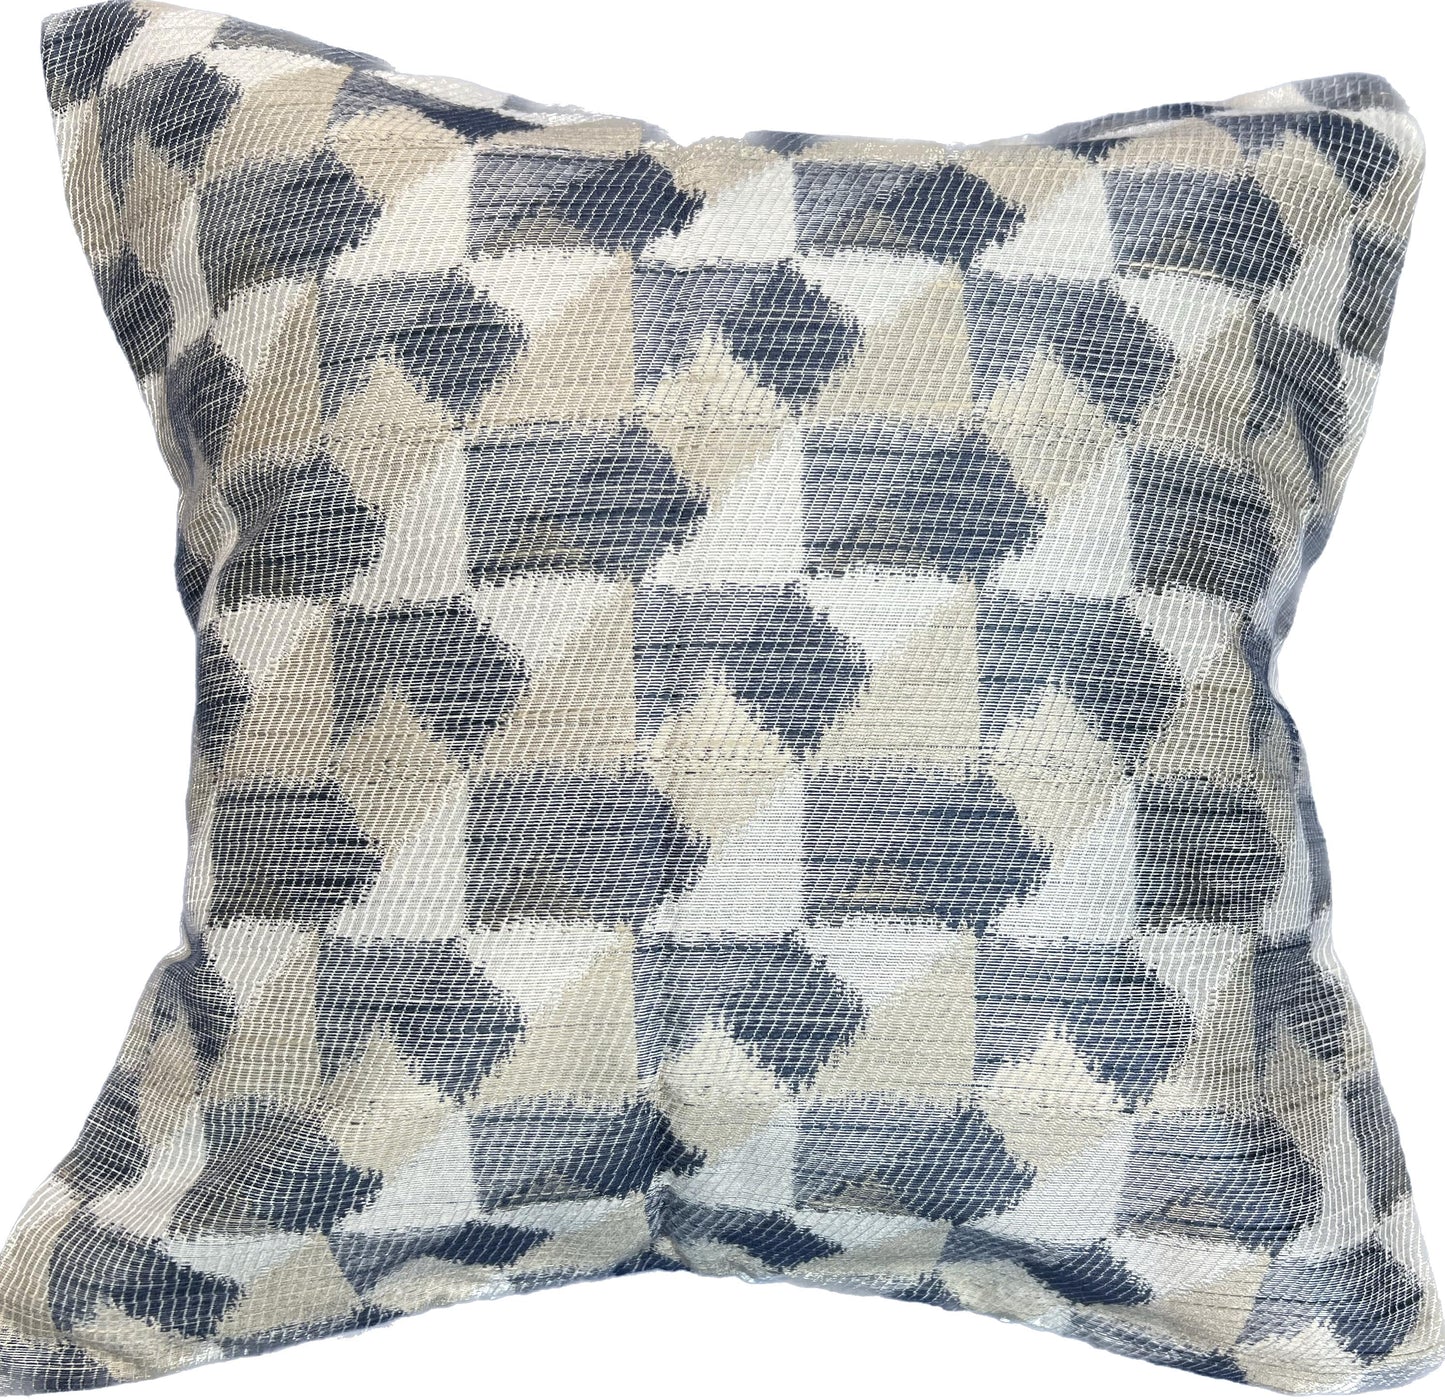 18"x18"  Abstract Pillow Cover